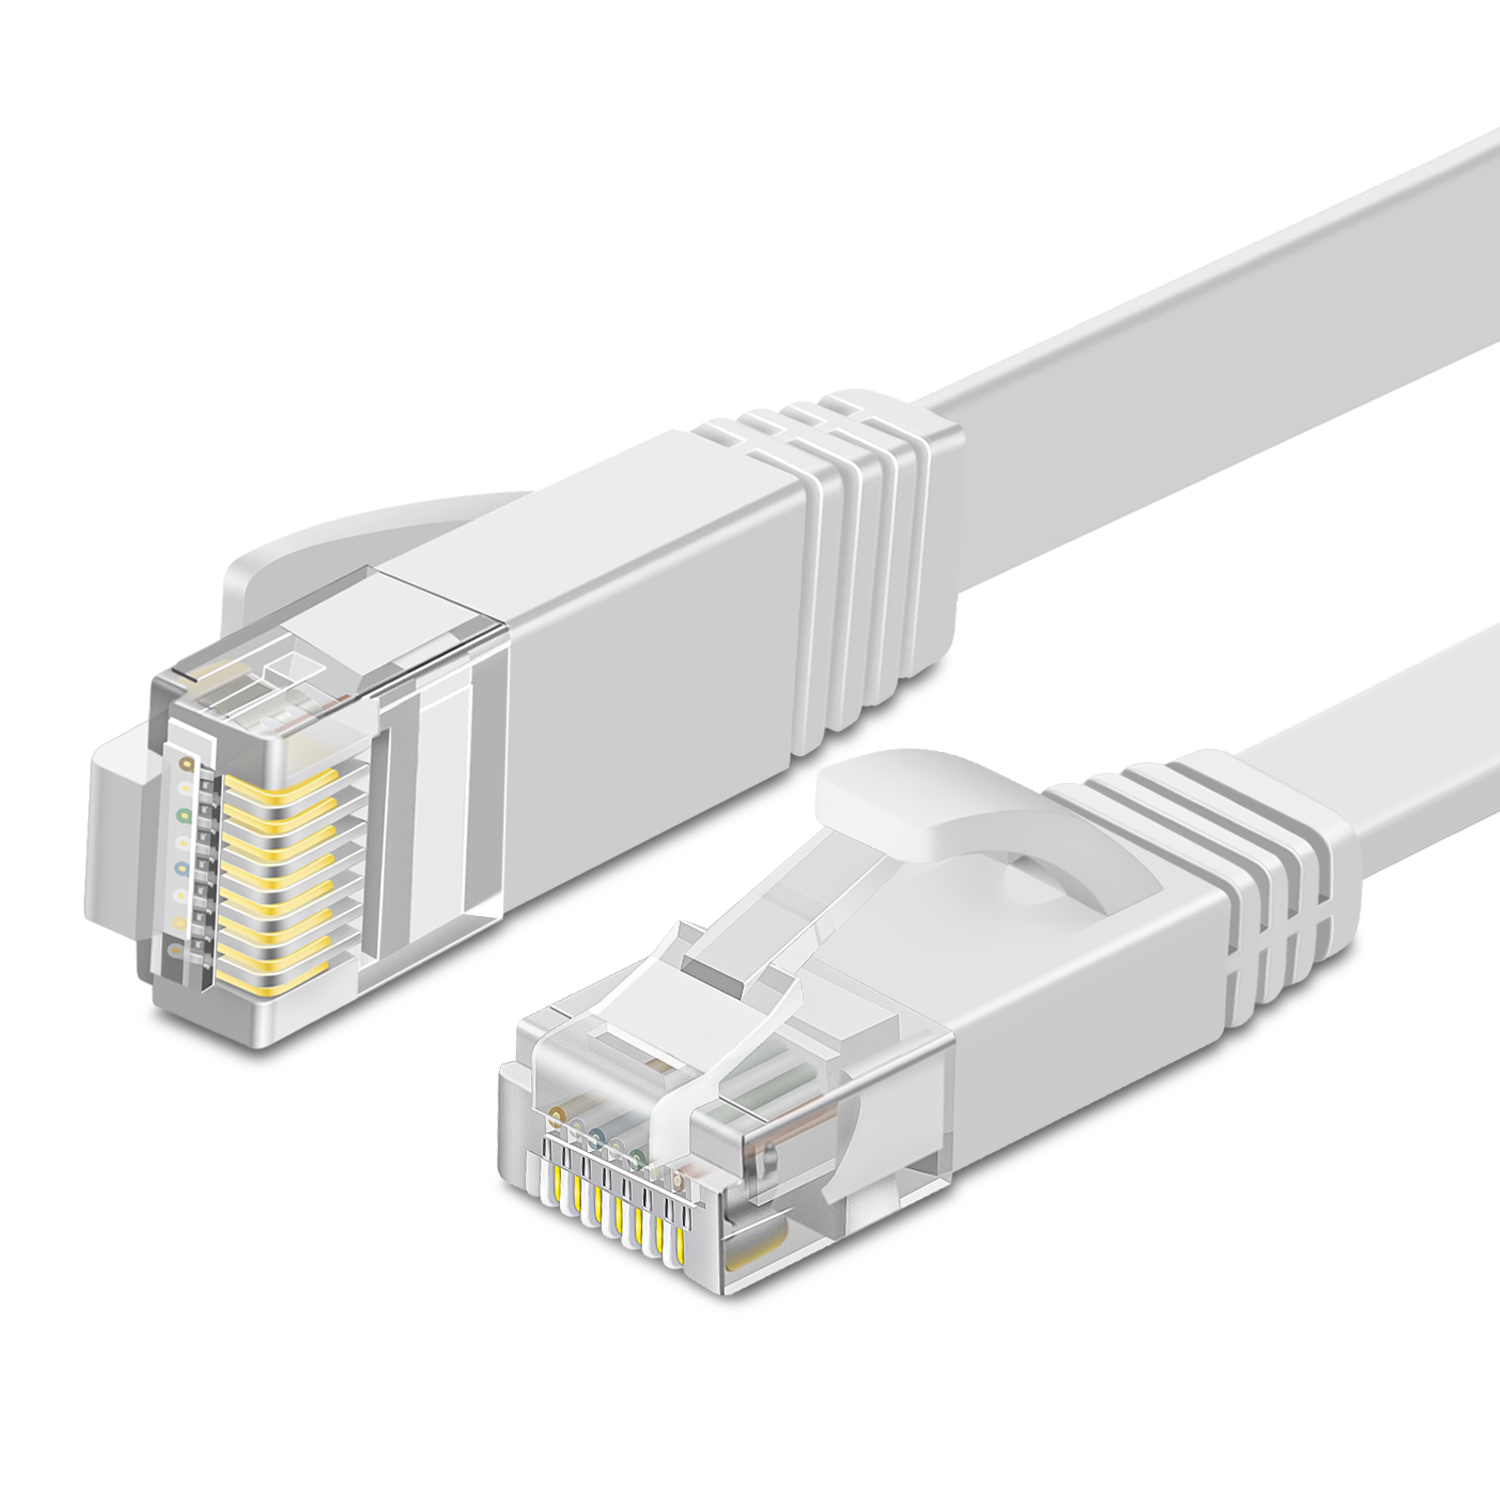 Ethernet Cable Cat 6 Flat Cable, Cat 6 Ethernet Cable 100 ft, Flat Wire Cat6 Ether Network Internet Cord - RJ45 Cable LAN Internet Ethernet Patch Cables Connector (White) - image 1 of 7